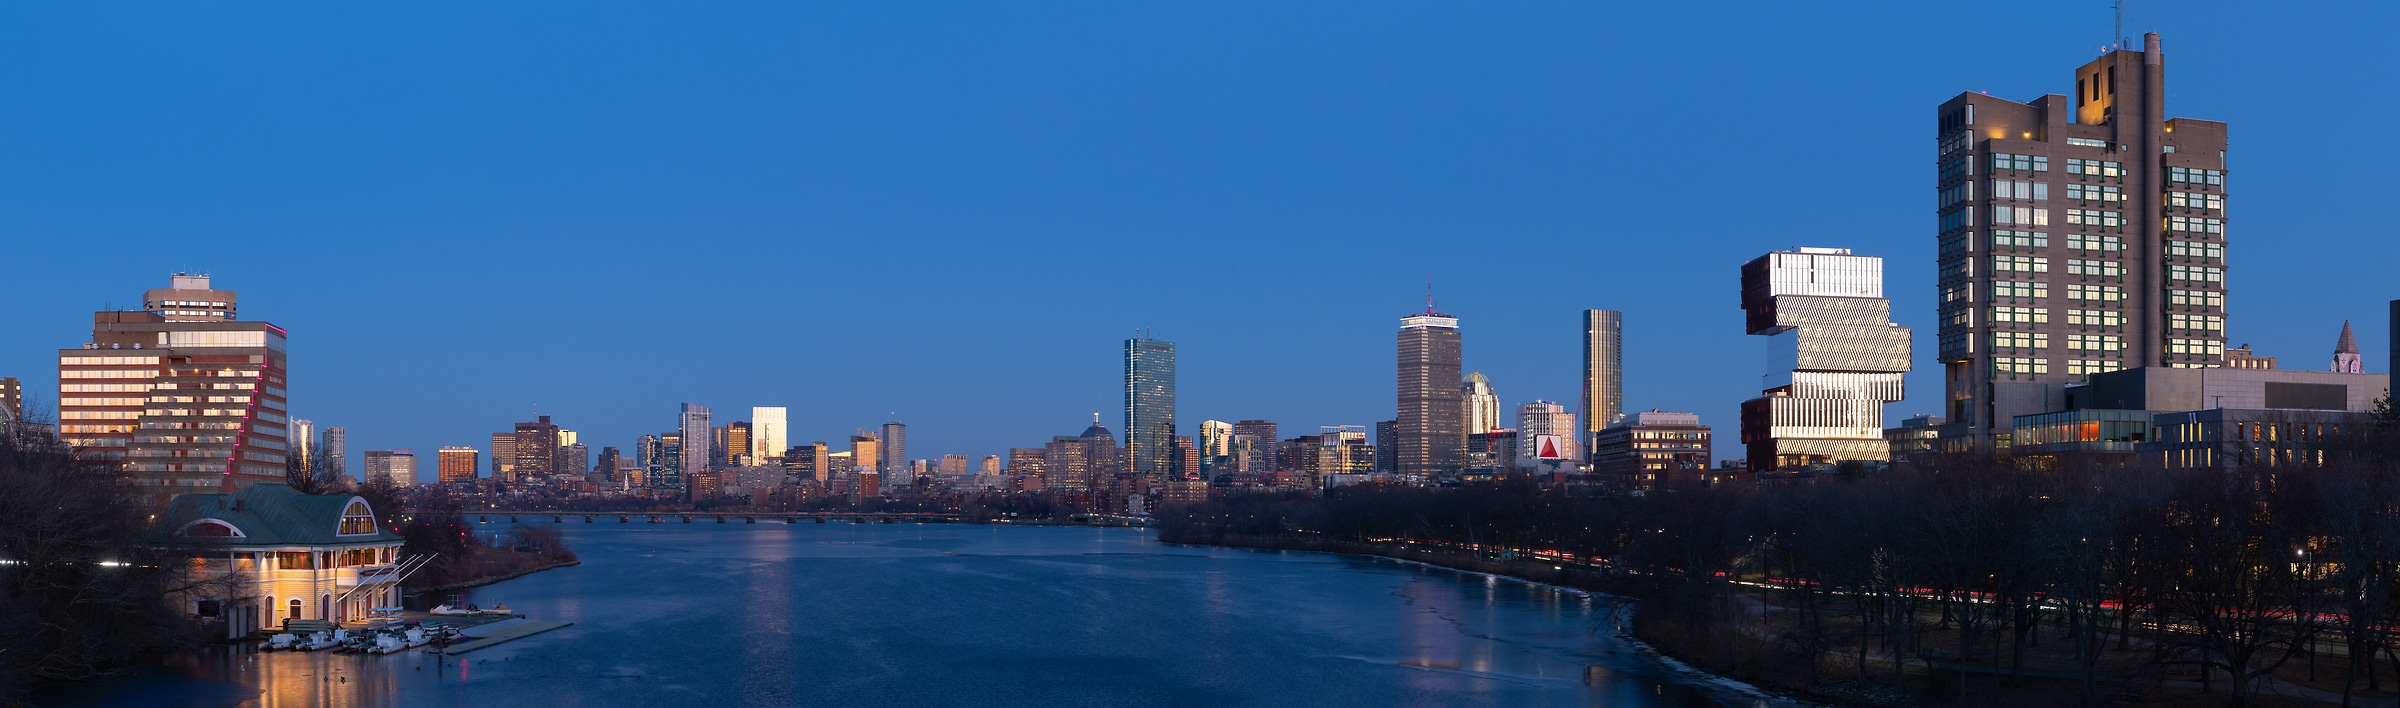 370 megapixels! A very high resolution, large-format VAST photo print of the Boston skyline and the Charles River at evening; cityscape photograph created by Greg Probst in Boston, Massachusetts.